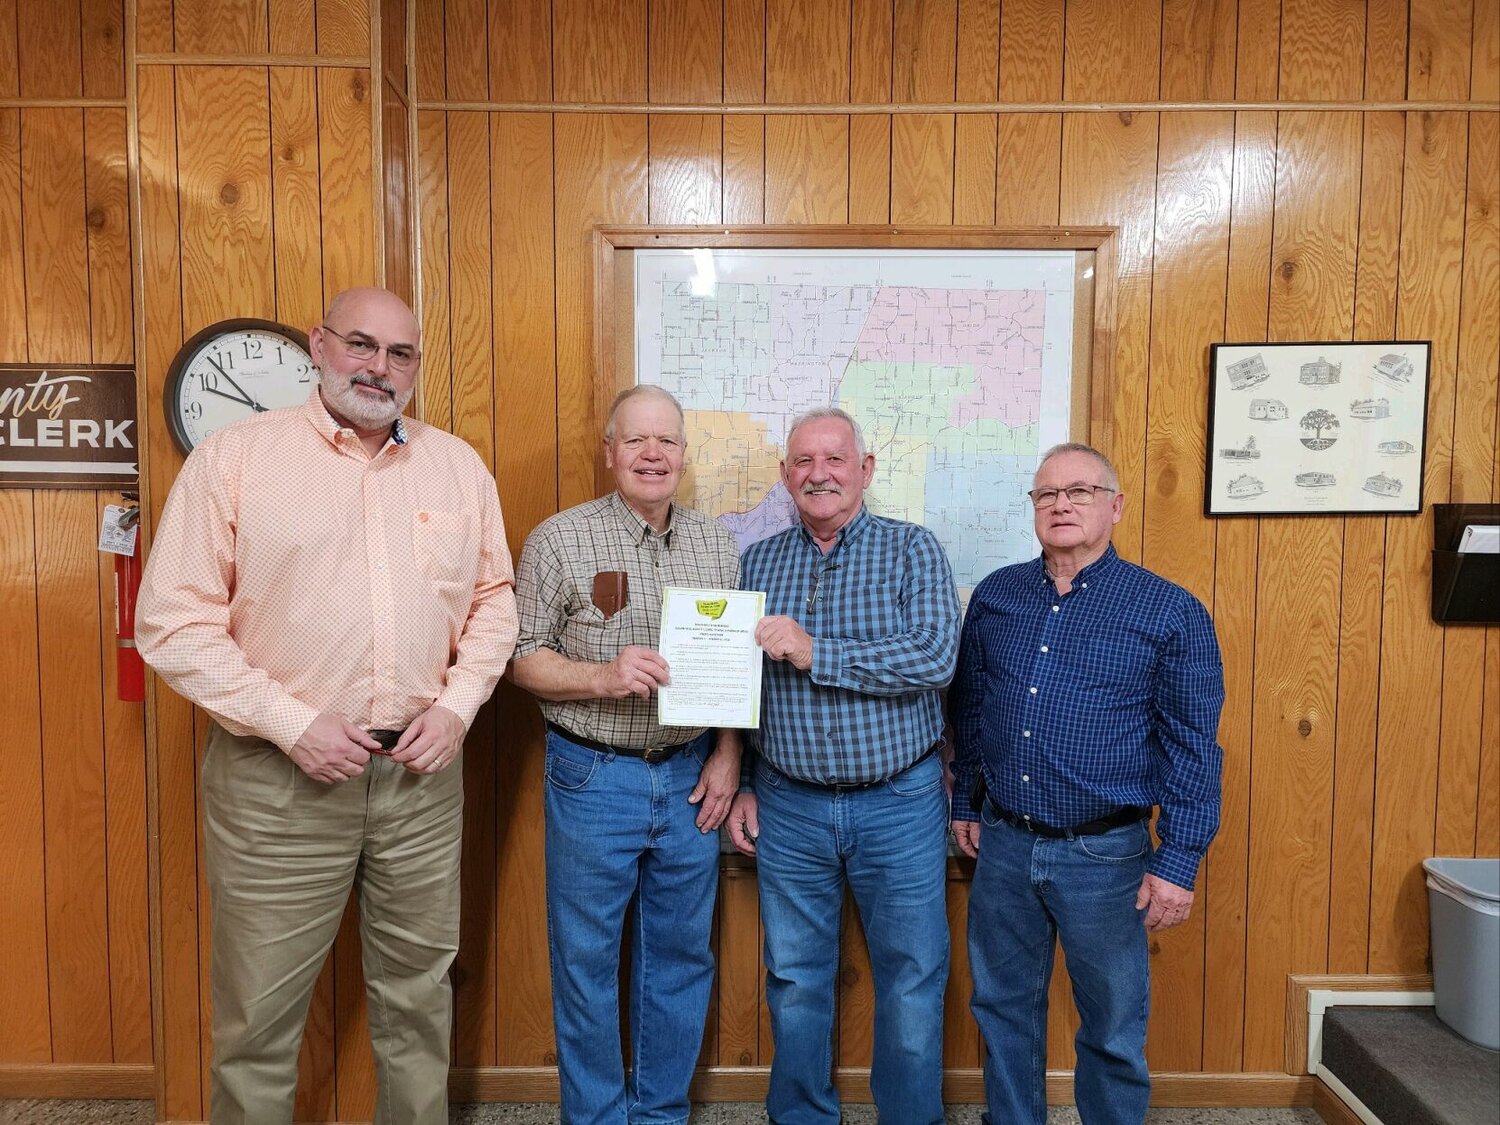 The Webster County Farm Bureau also visited the Webster County Commissioners office to receive an official proclamation celebrating Thank a Farmers week (Mar. 5 through Mar. 11.).


From left to right, Northern Commissioner Dale Fraker, Bill Messick from Webster County Farm Bureau, Presiding Commissioner Paul Ipock, and Southern Commissioner Randy Owens are seen here.